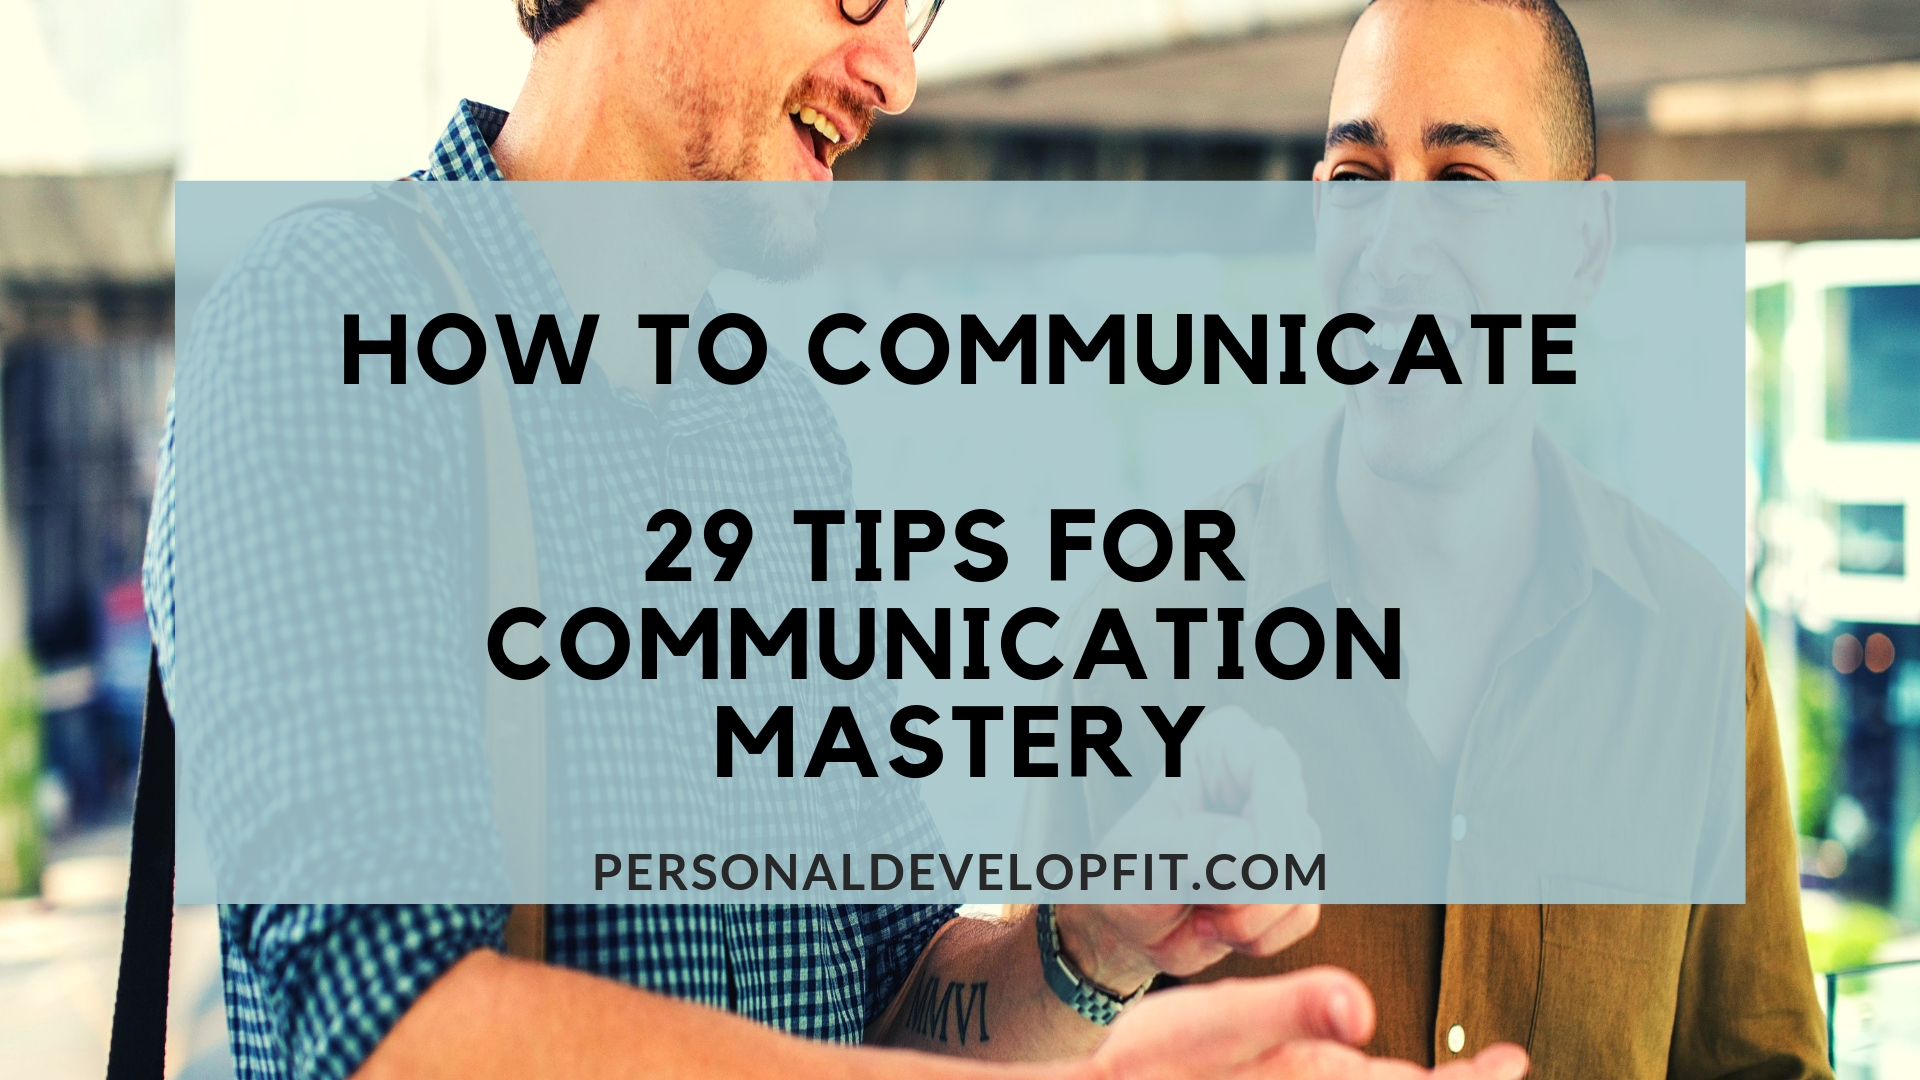 How To Communicate Effectively 29 Tips For Mastering Communication